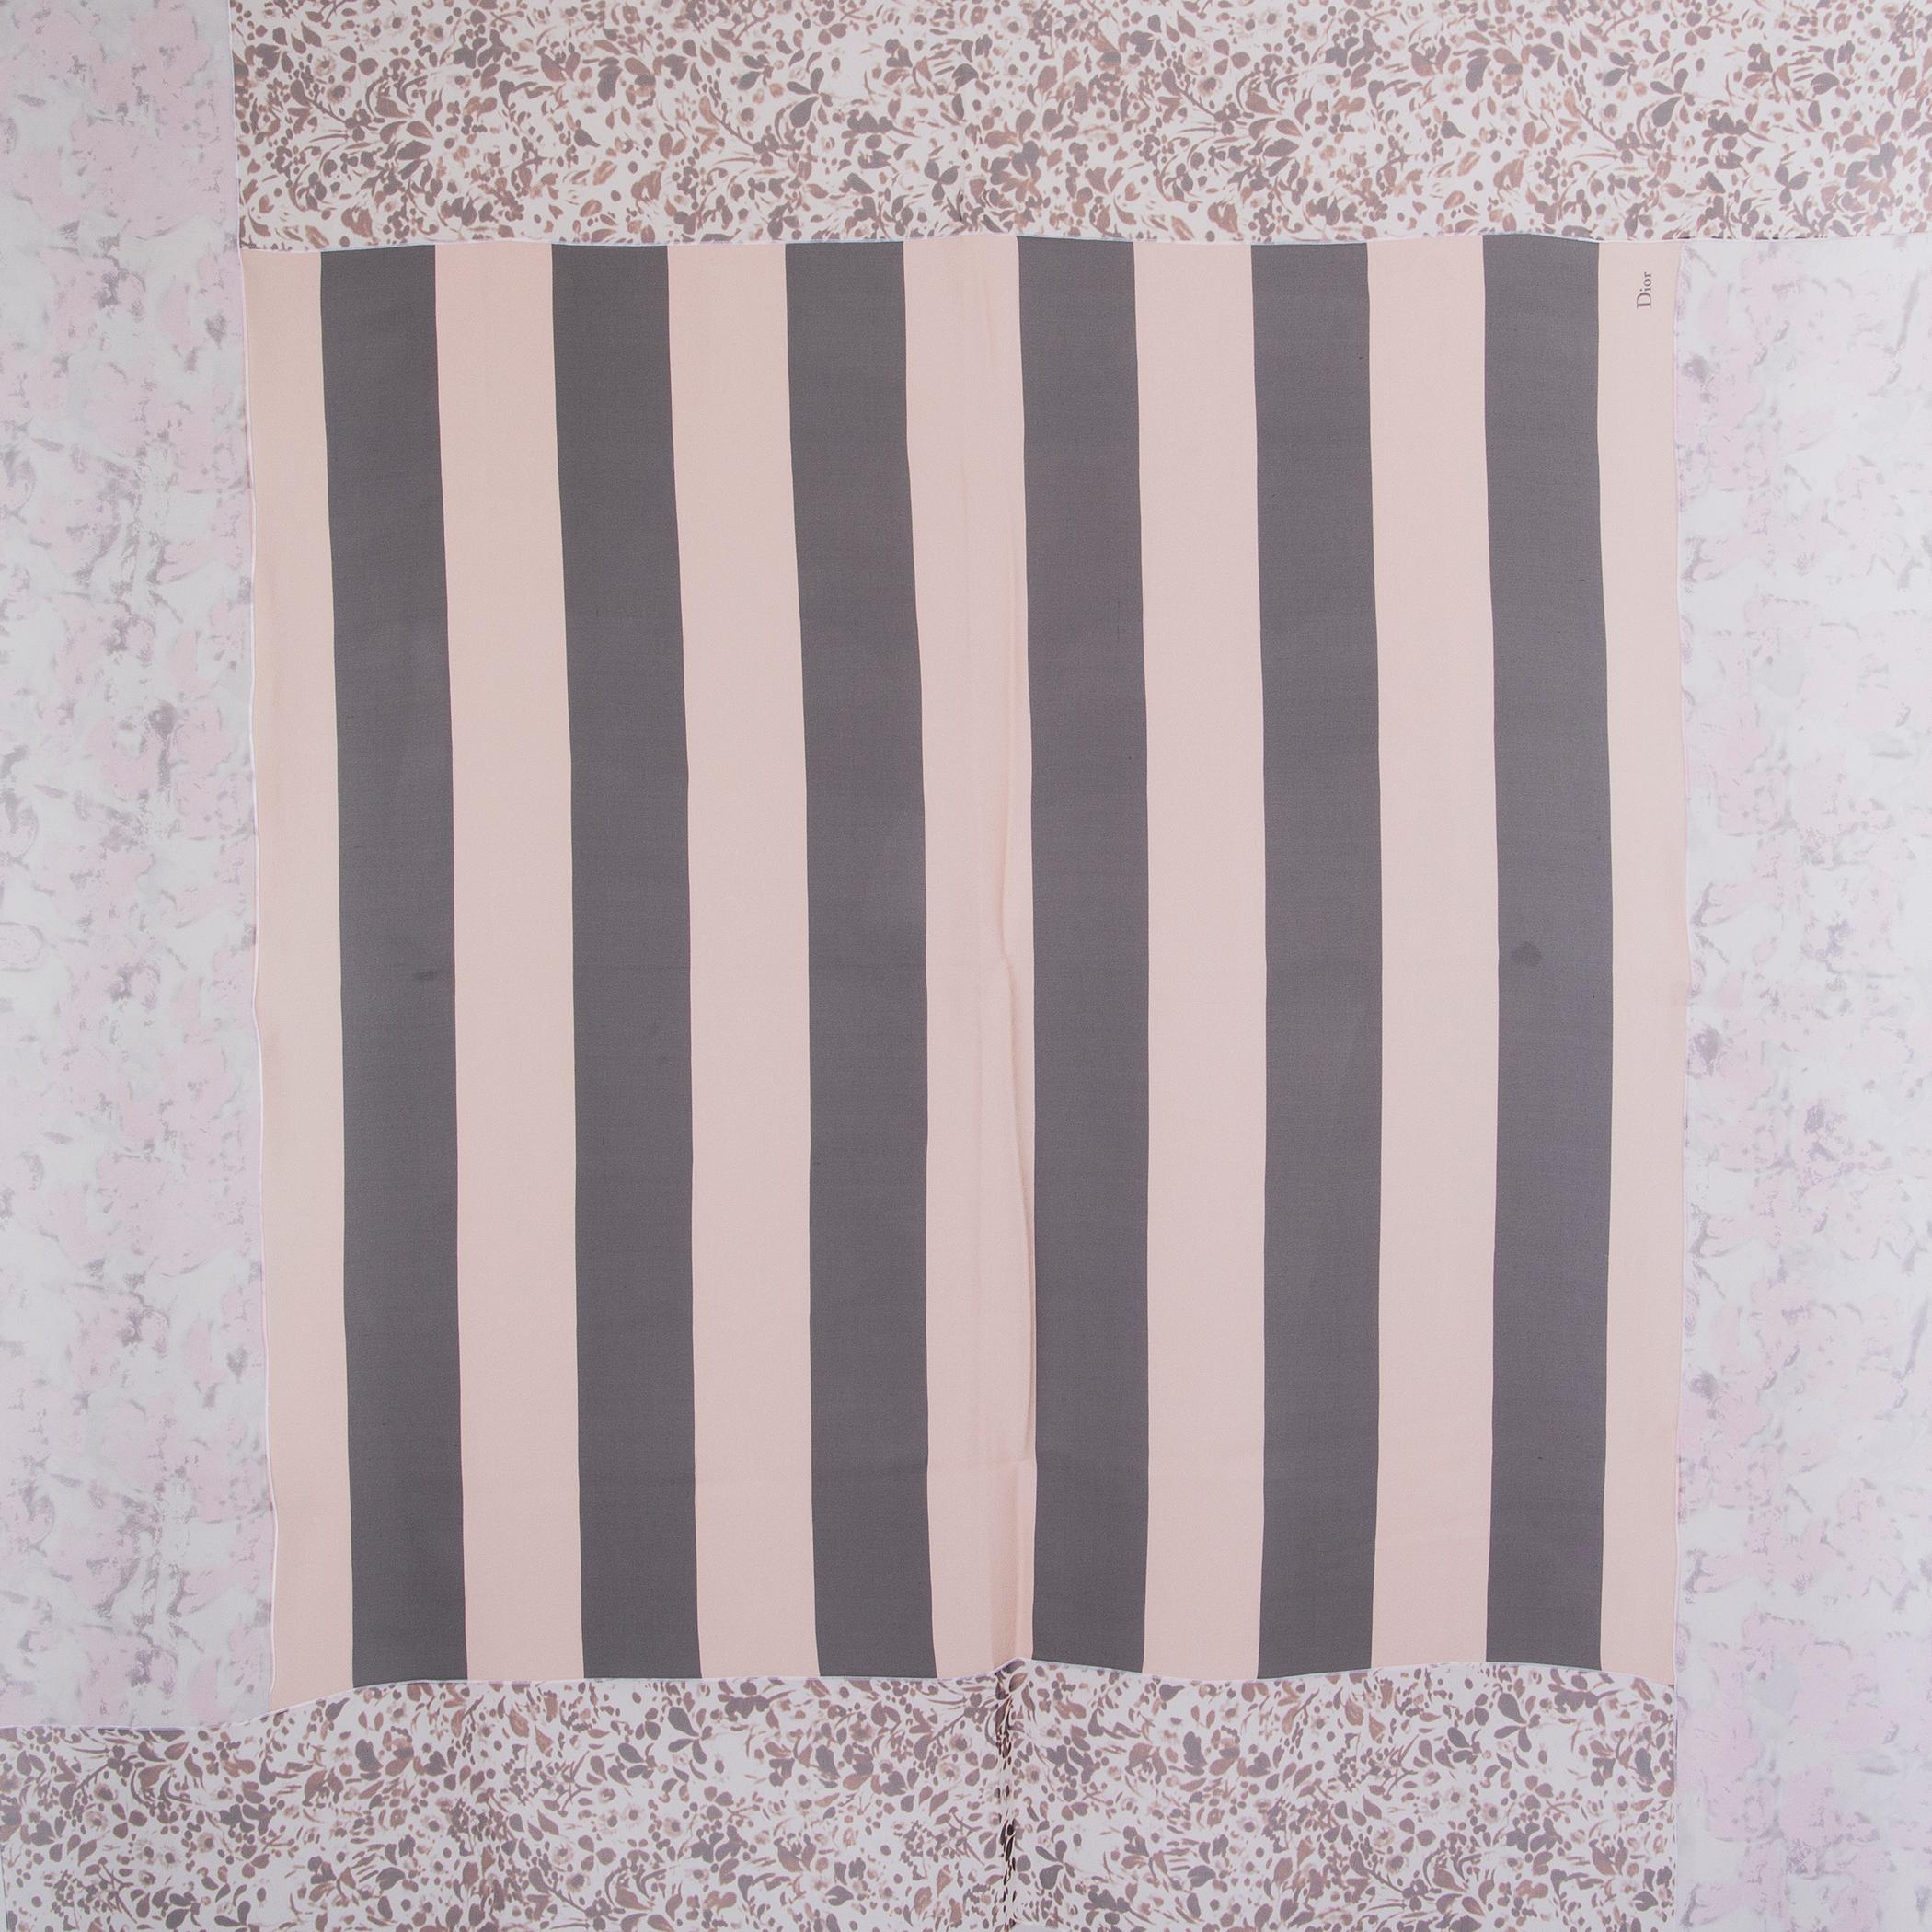 Christian Dior striped organza scarf in light nude, black, baby pink and brown silk (100%) with a floral organic print around the boarders. Has been worn and is in excellent condition. 

Width 138cm (53.8in)
Length 138cm (53.8in)